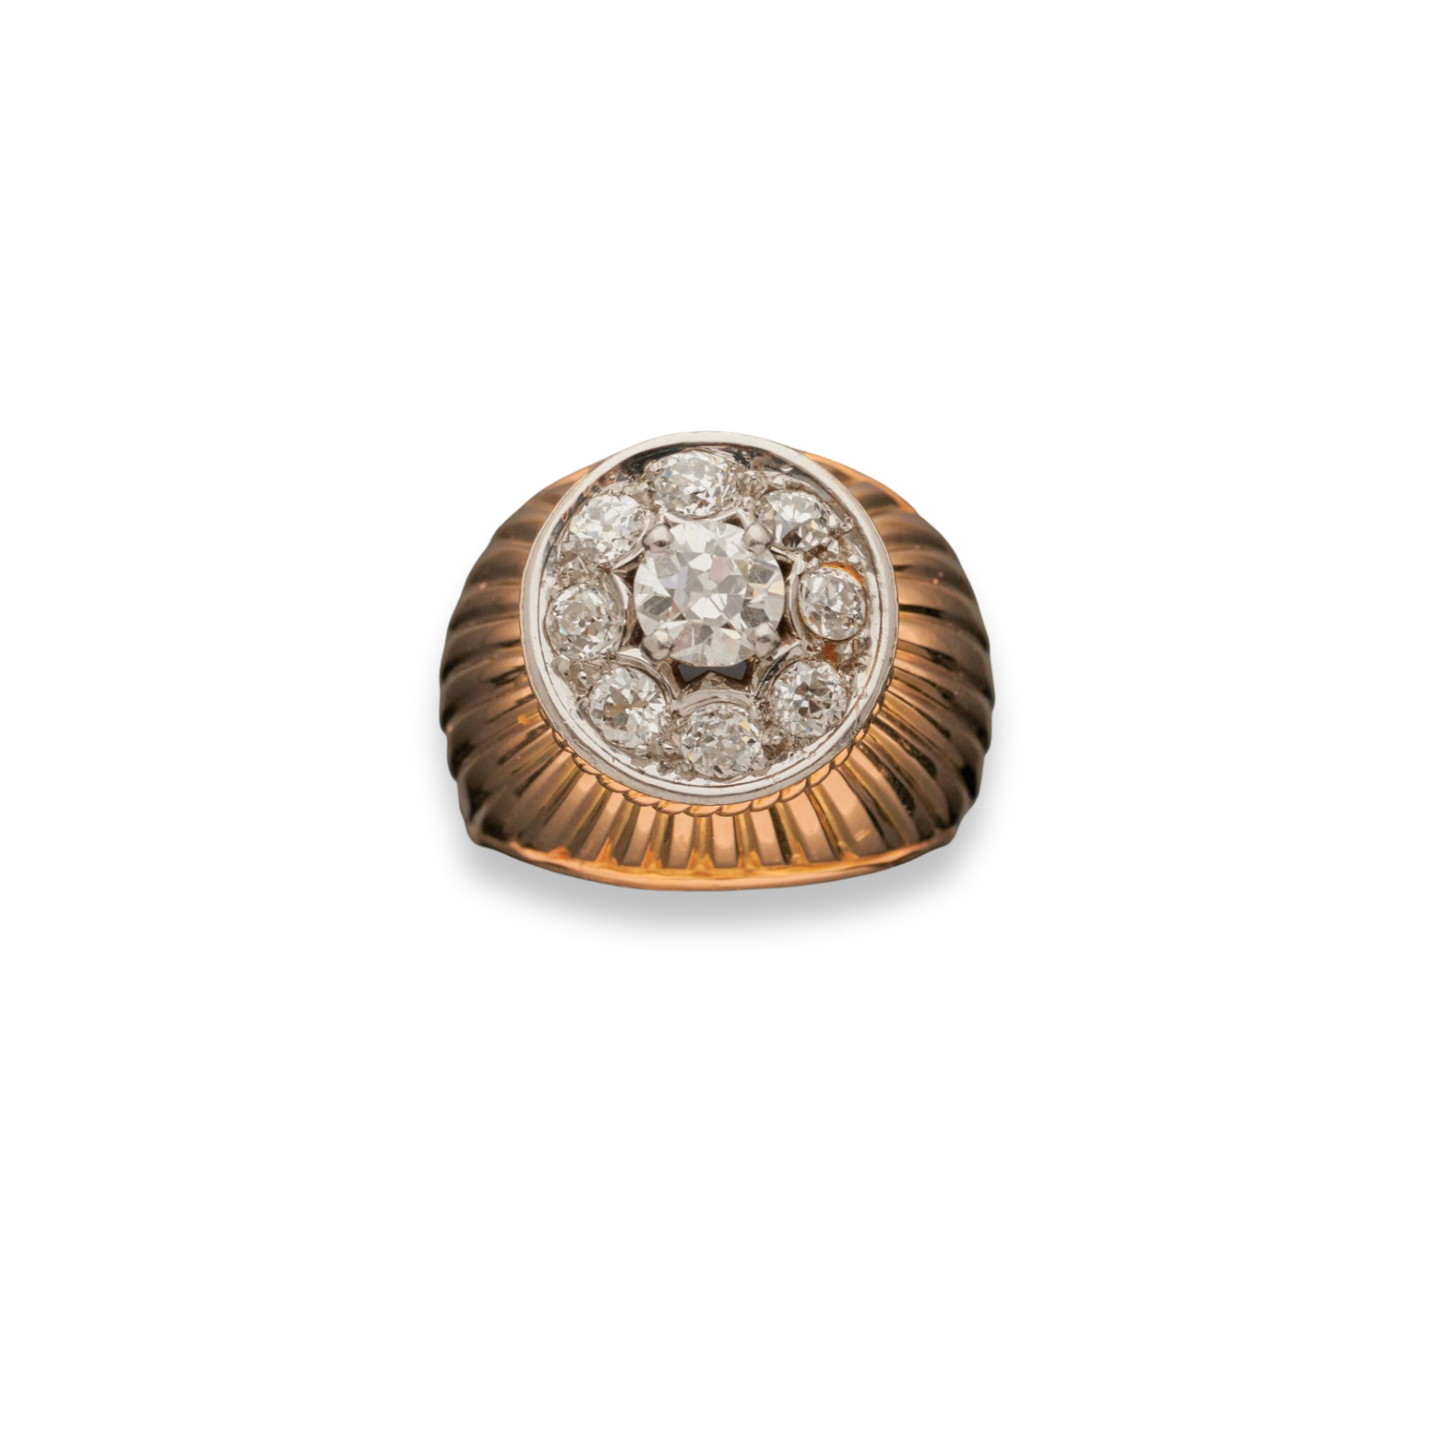 Vintage Dome Ring